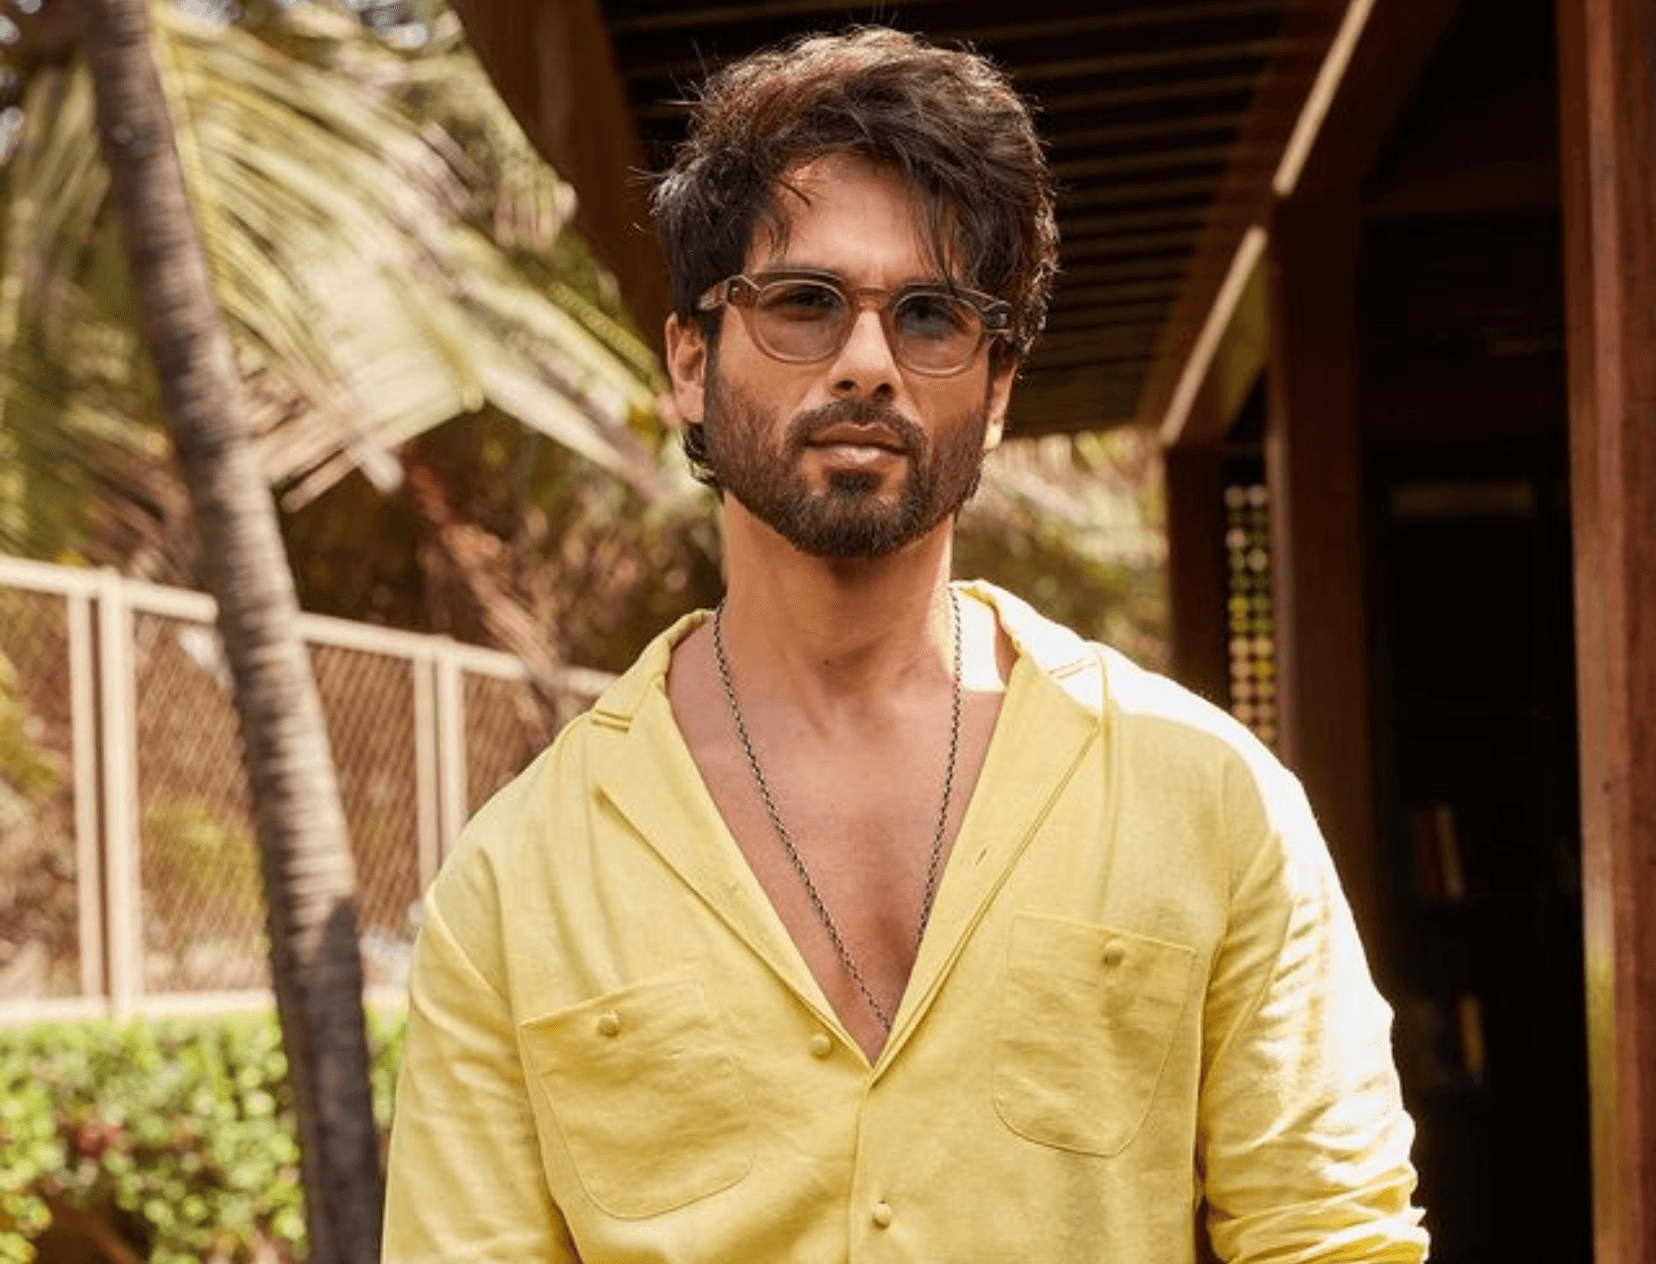 Shahid Kapoor Says Women Fix Messed-Up Men After Marriage &amp; The Internet Is Not Having It